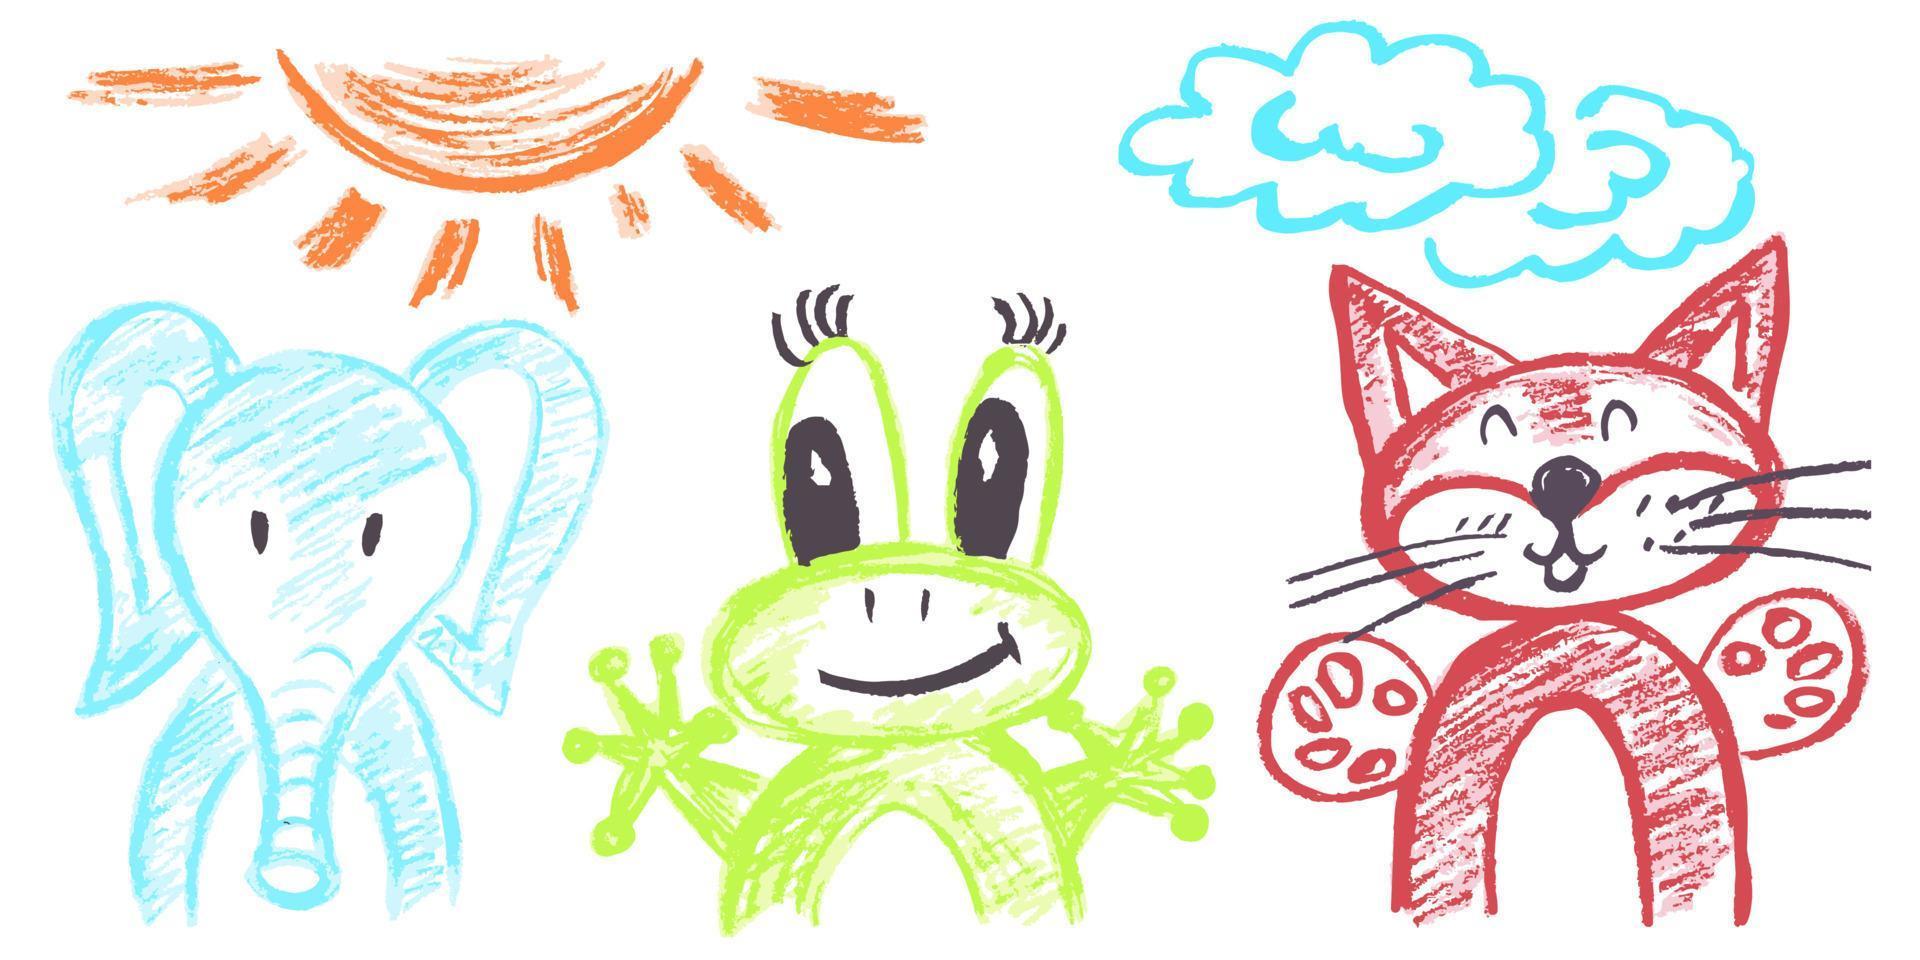 Cute childish drawing with wax crayons vector